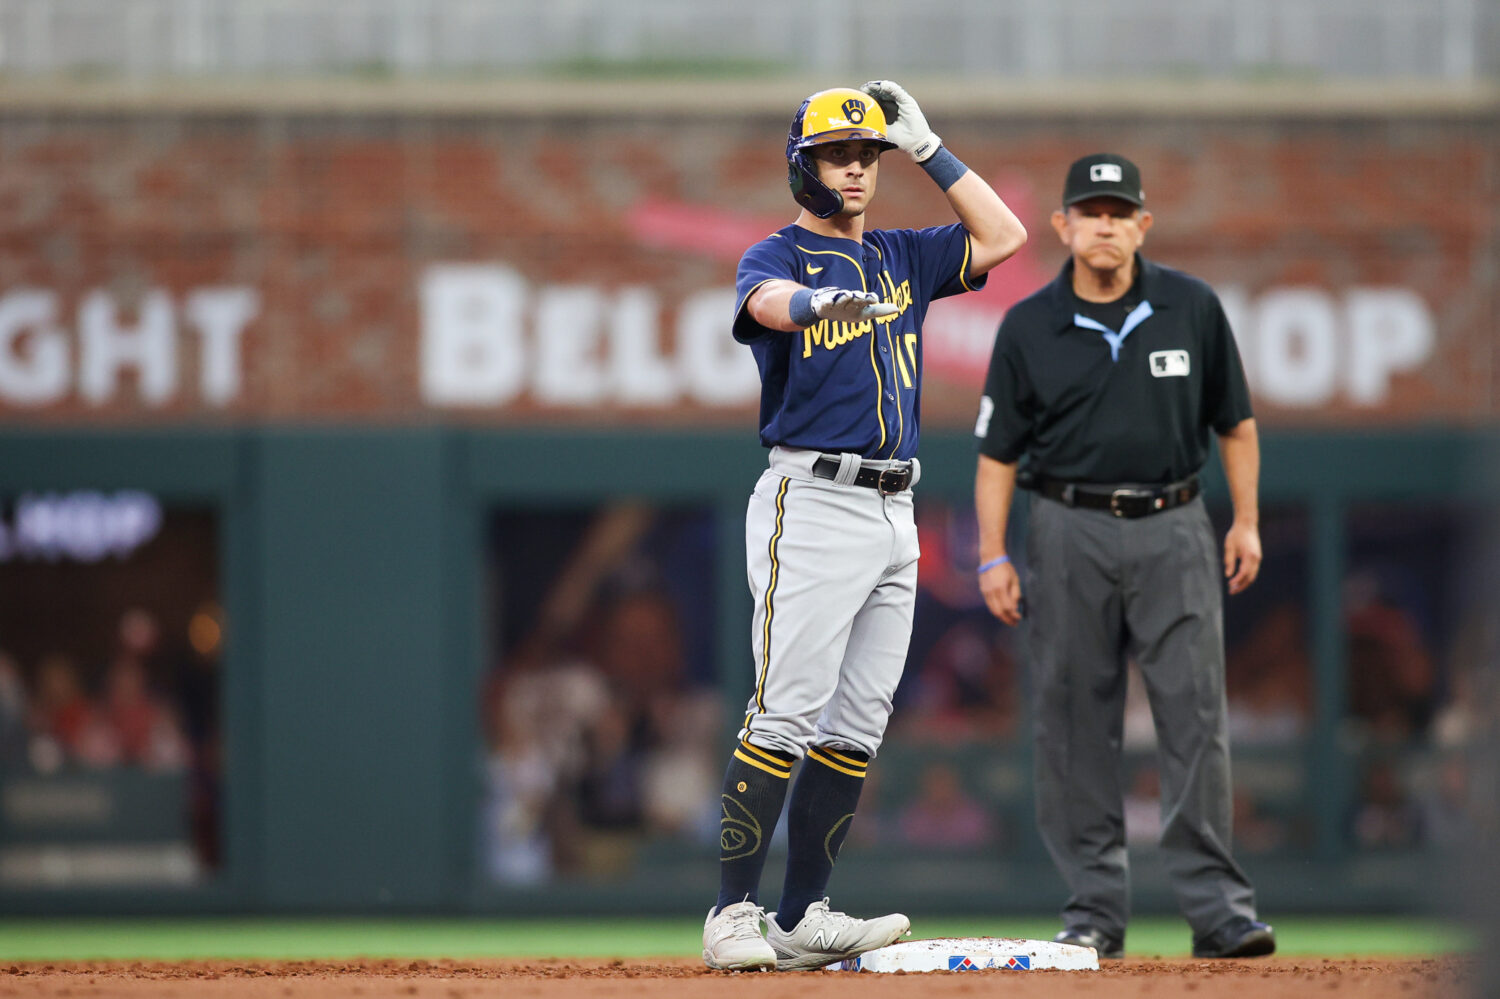 With 'fine place in the standings,' Brewers head to second half of season